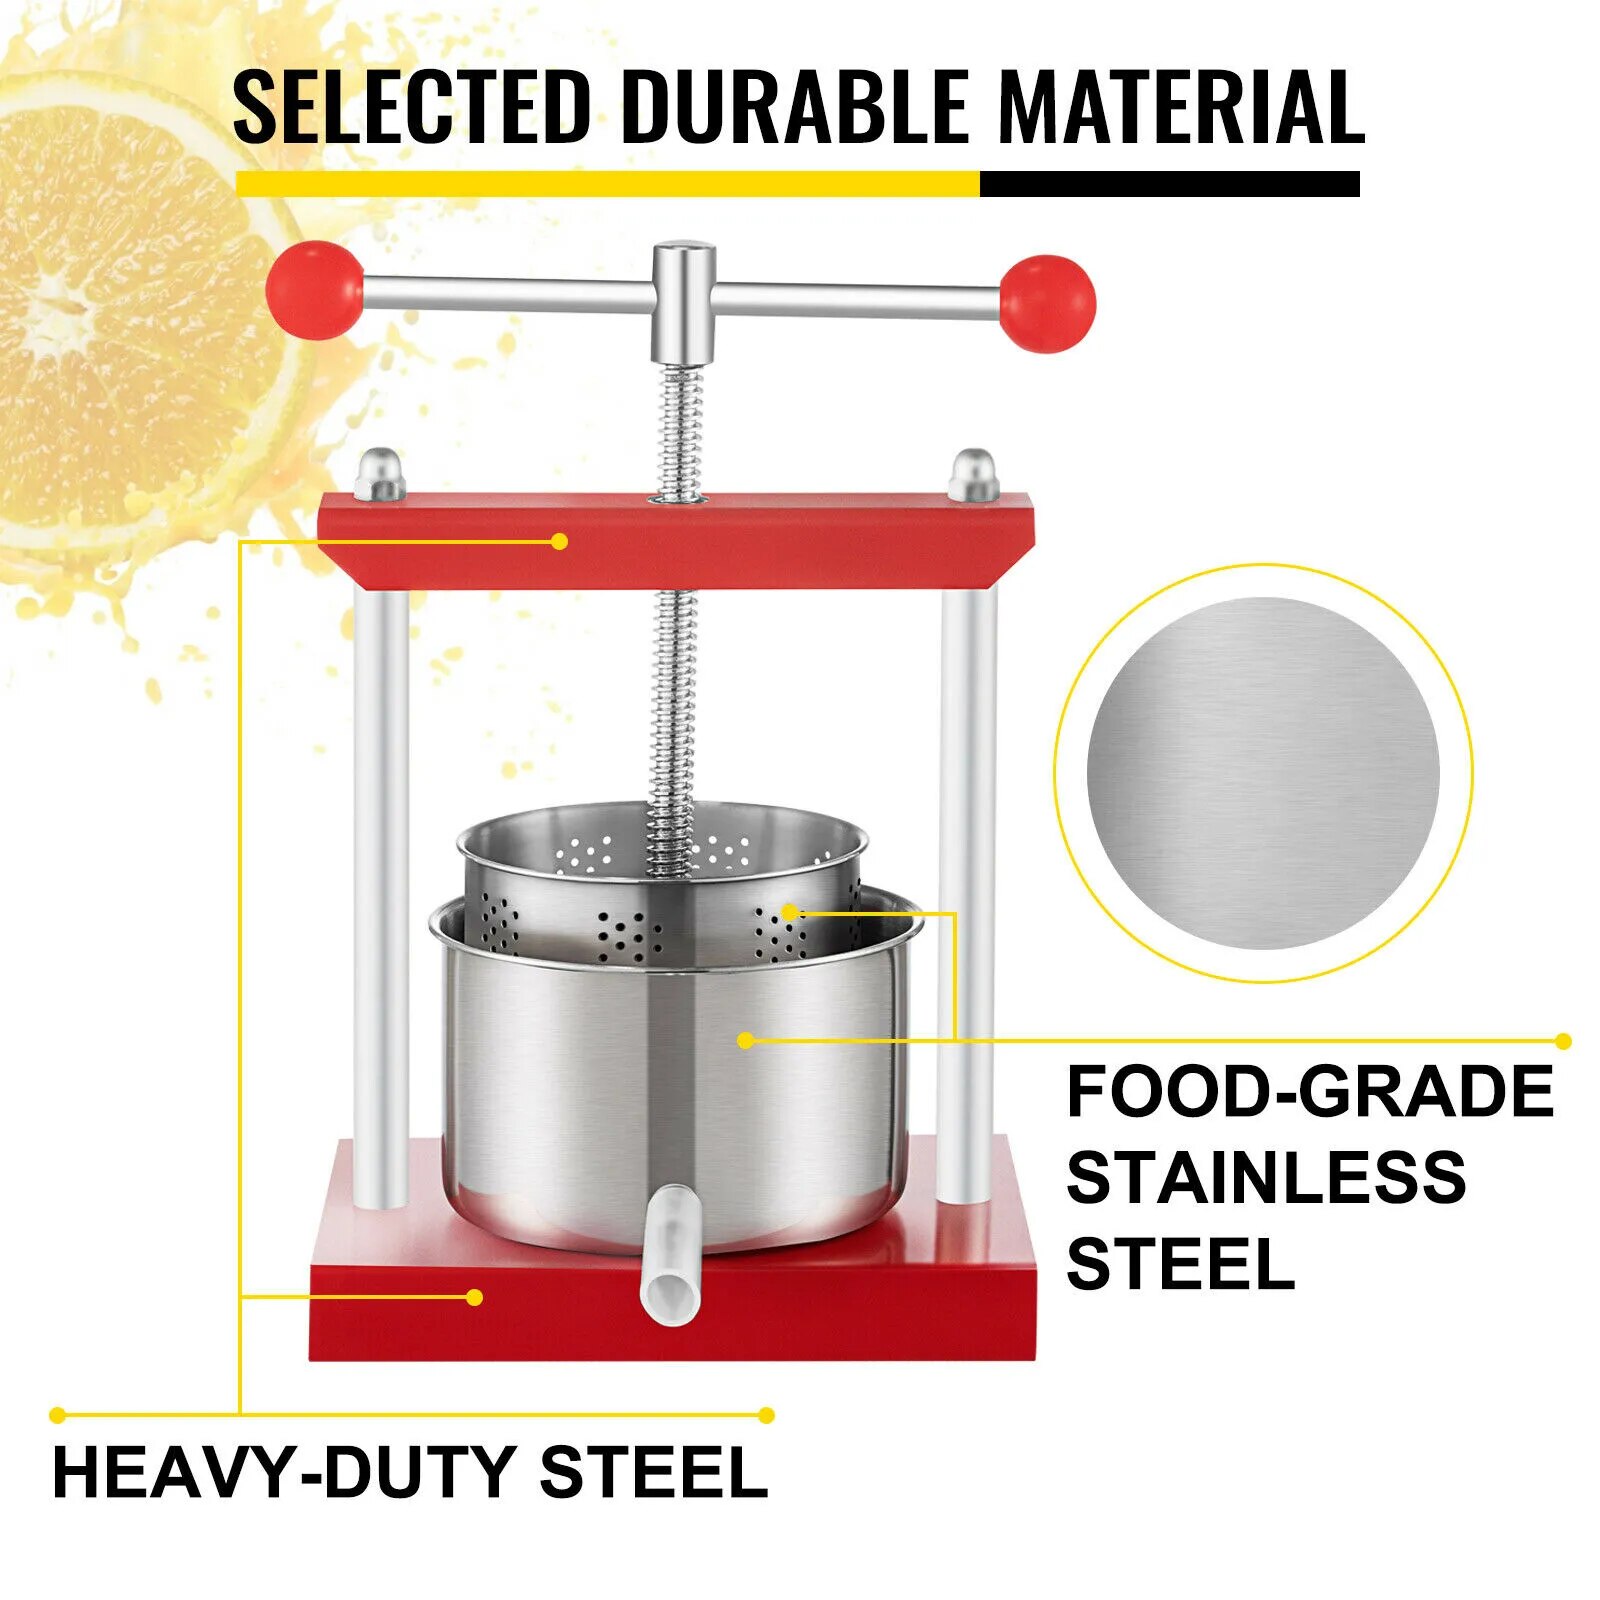 Manual Orange Juicer: Stainless Steel Extractor & Squeezer - Household Fruit Press for Juice & Tinctures